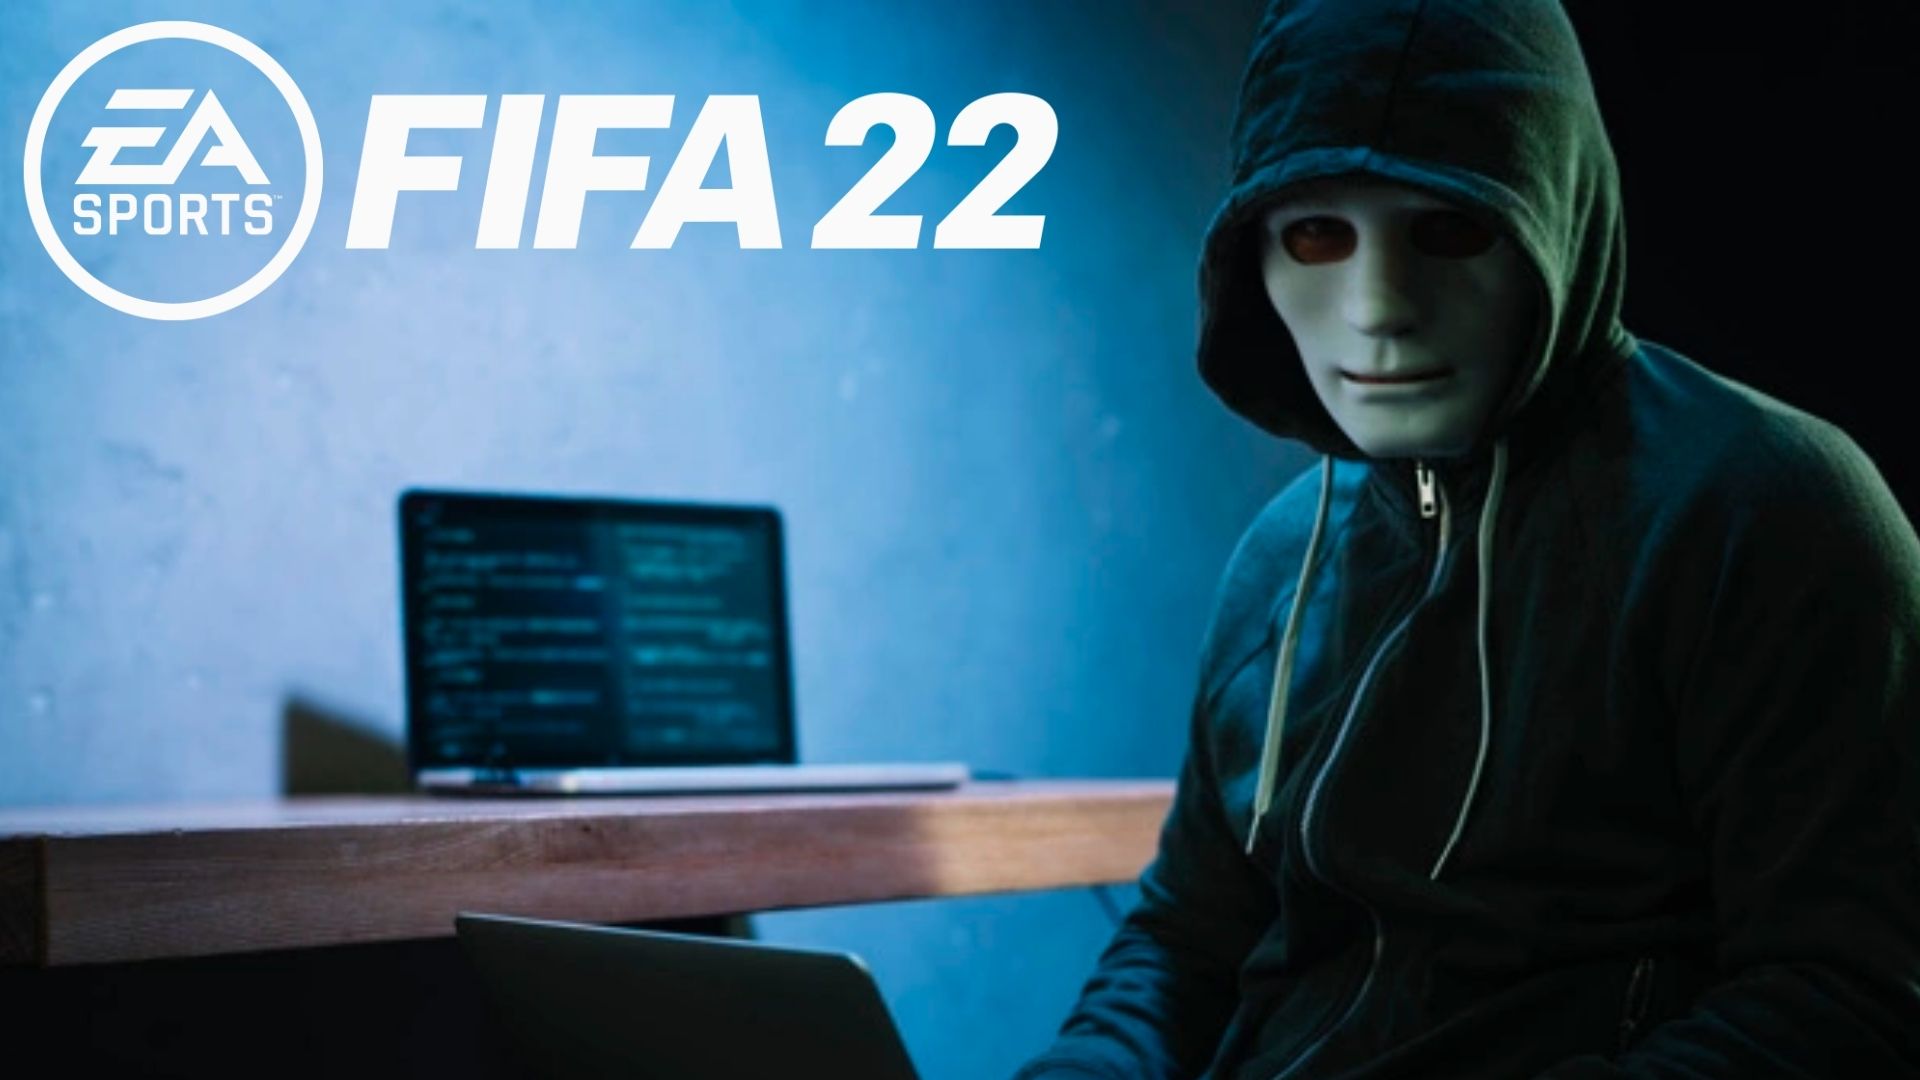 Masked hacker with computer next to FIFA 22 logo